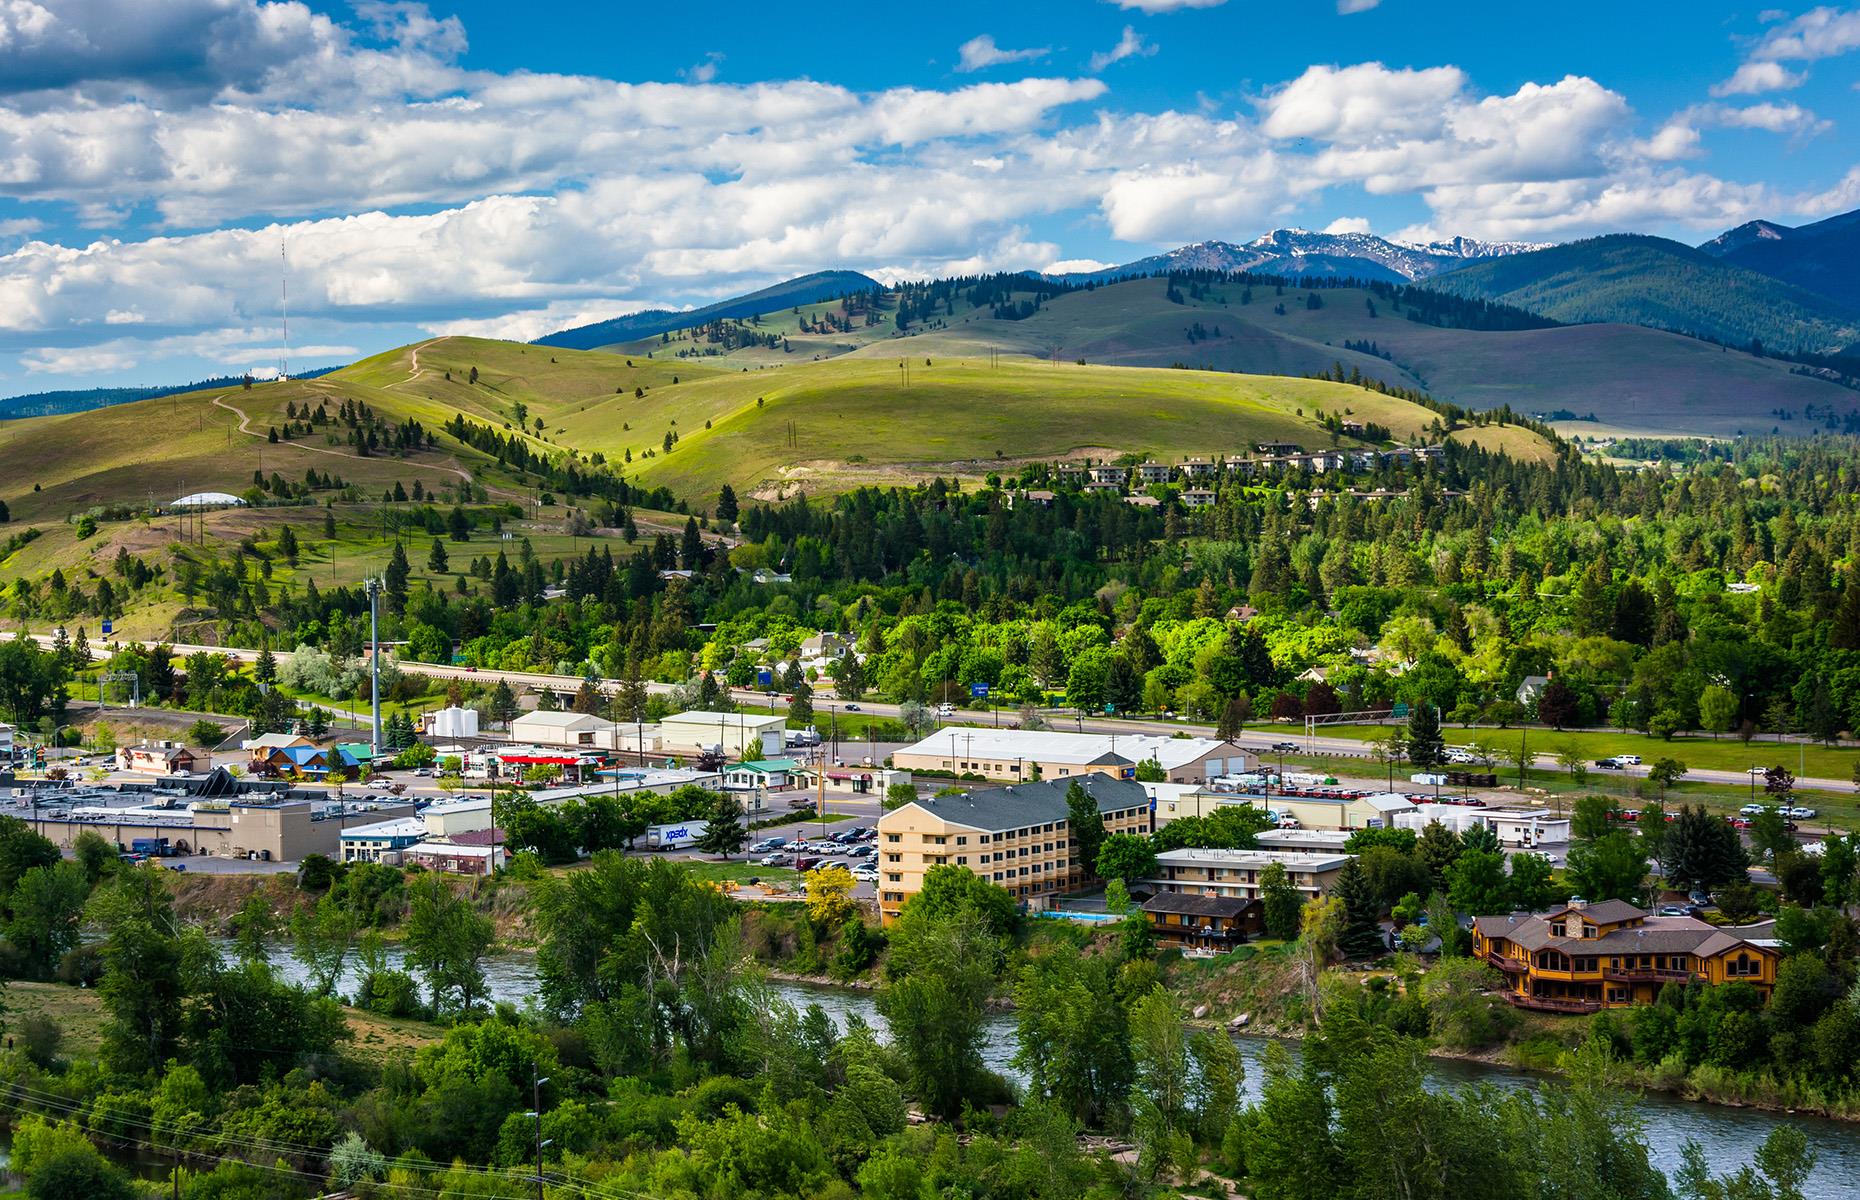 <p>If you're a foodie, it's well worth paying a visit to the picturesque mountain town of Missoula (pictured), which is an underrated gourmet spot in Montana. Sink your teeth into the downtown area with <a href="https://tasteofmissoula.com/">this tour</a>, which combines craft cocktails with some of the city's best dishes, from plantains to French onion soup. Your guides will feed you plenty of the town's history along the way too.</p>